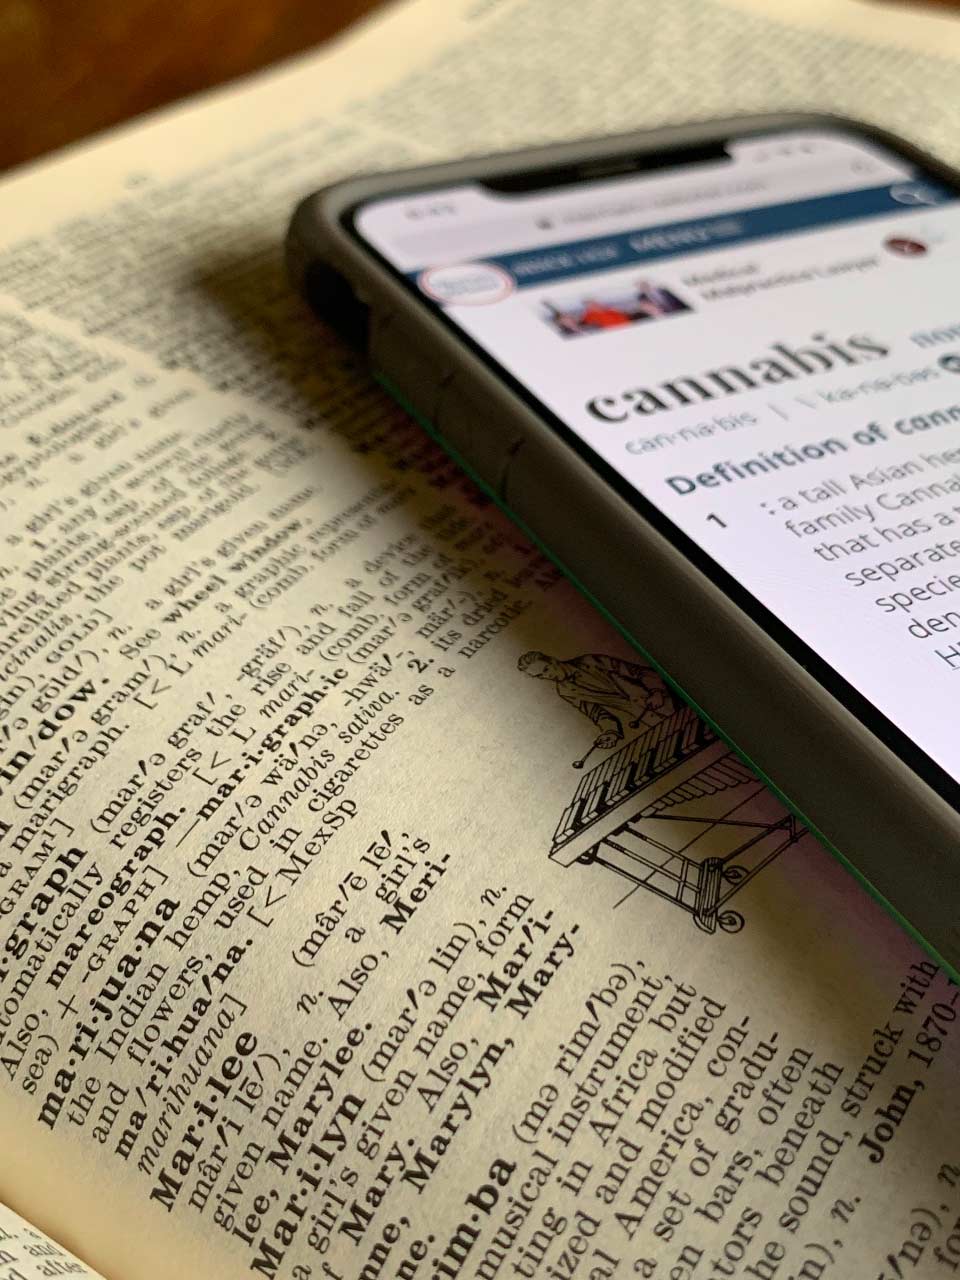 Dictionary book page with smartphone placed on top, showing dictionary definition of cannabis. Photo by Margo Amala/Unsplash